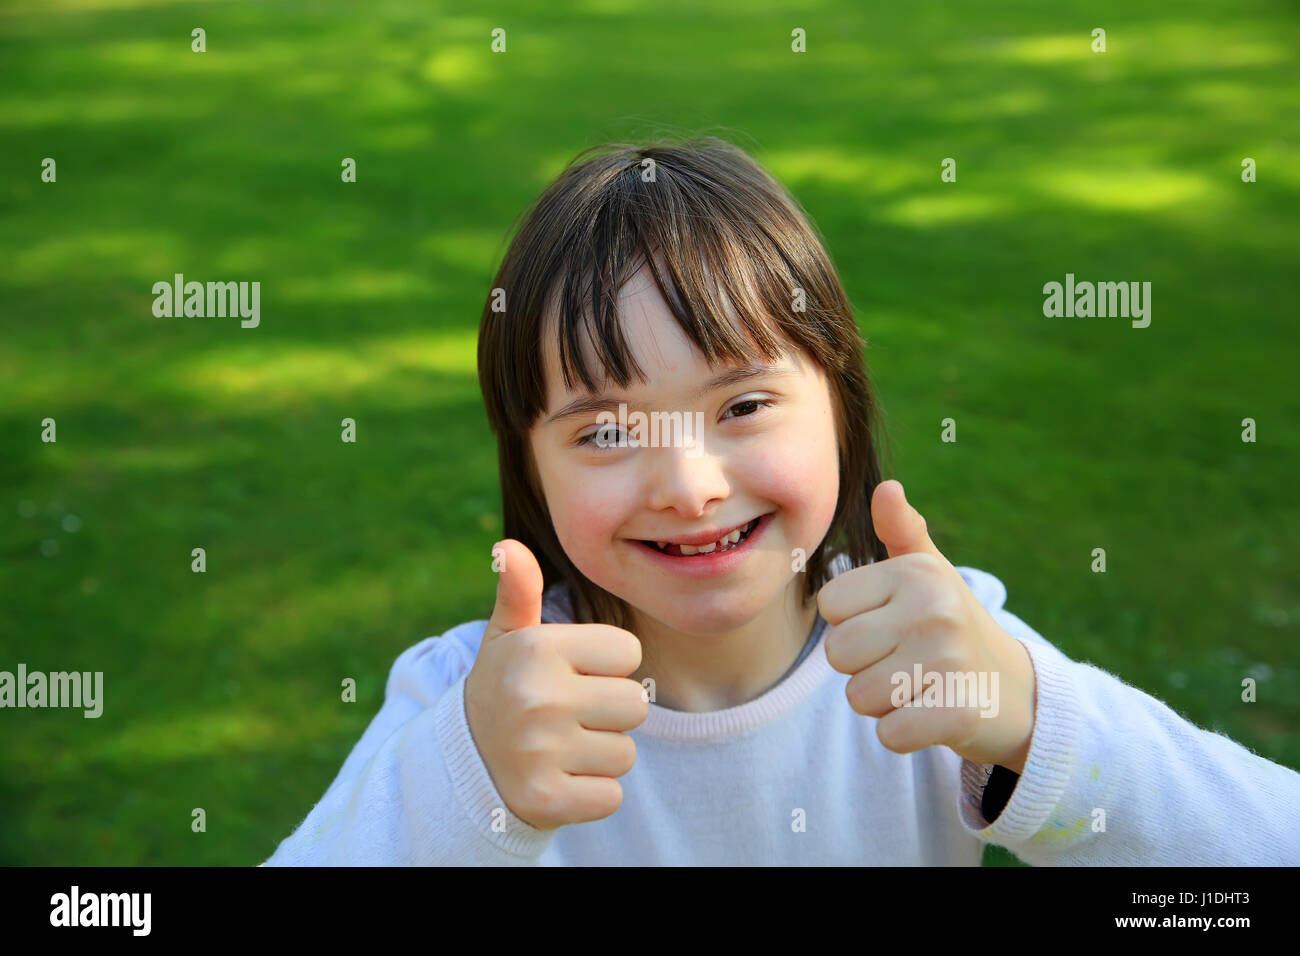 Down syndrome girl smiling in the park Stock Photo